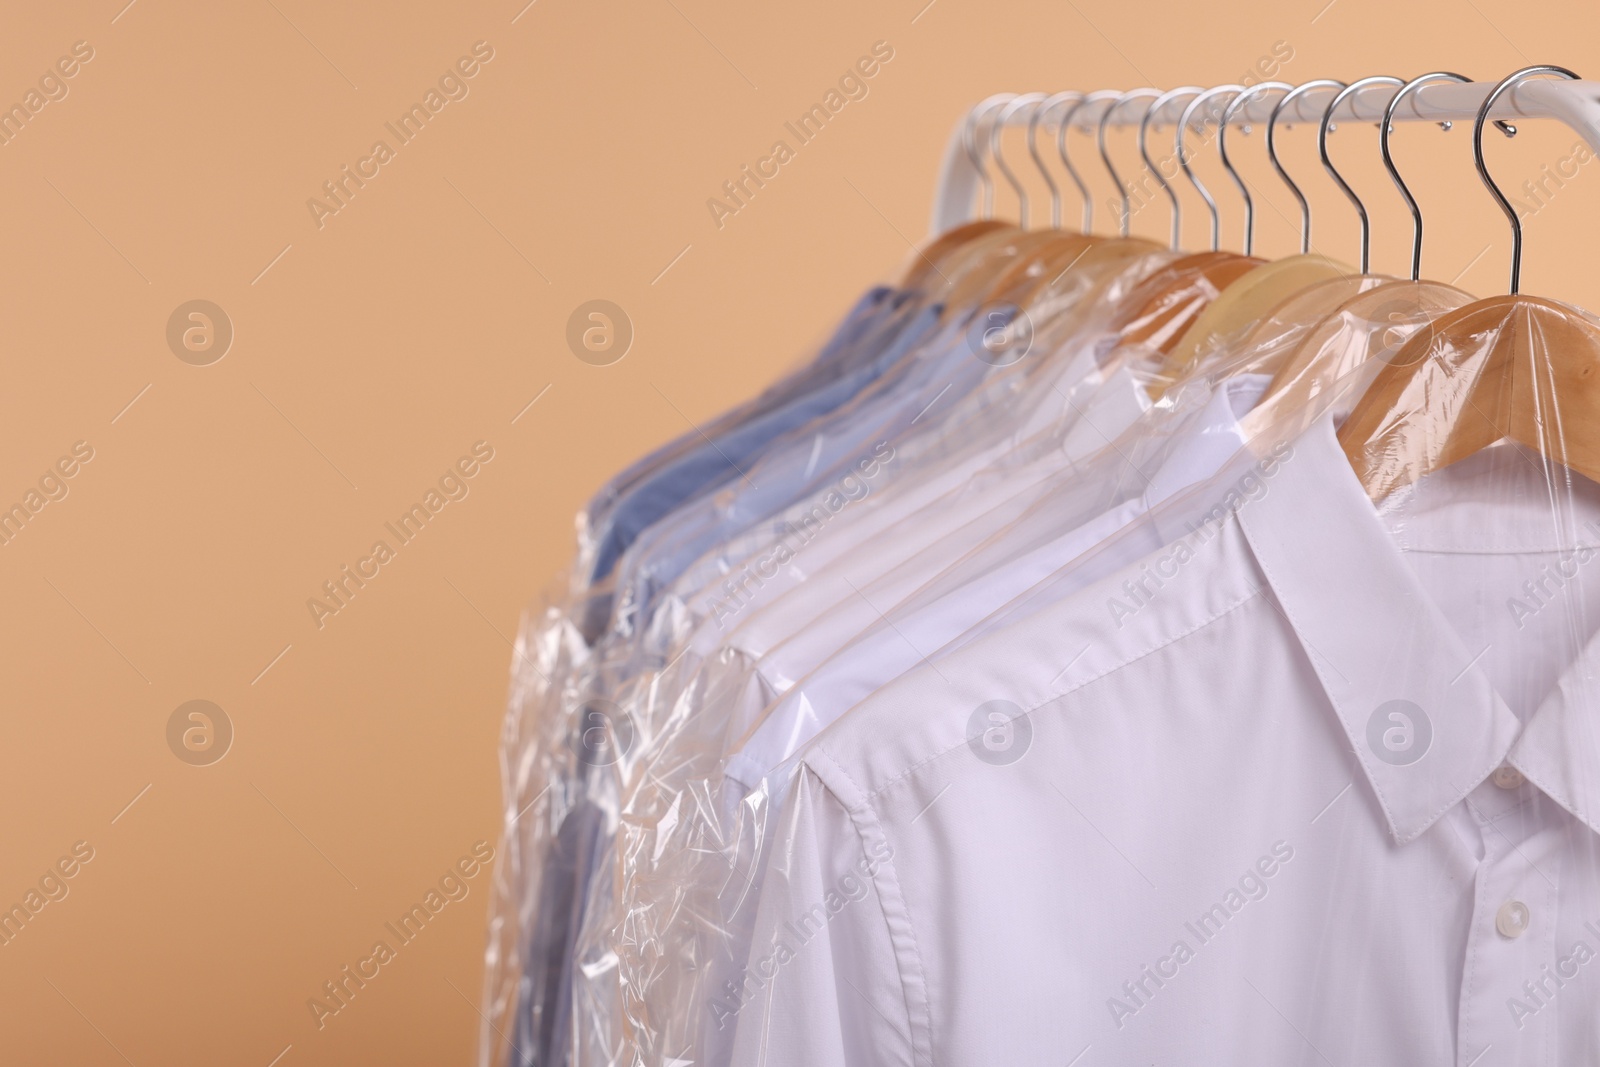 Photo of Dry-cleaning service. Many different clothes in plastic bags hanging on rack against beige background, closeup and space for text